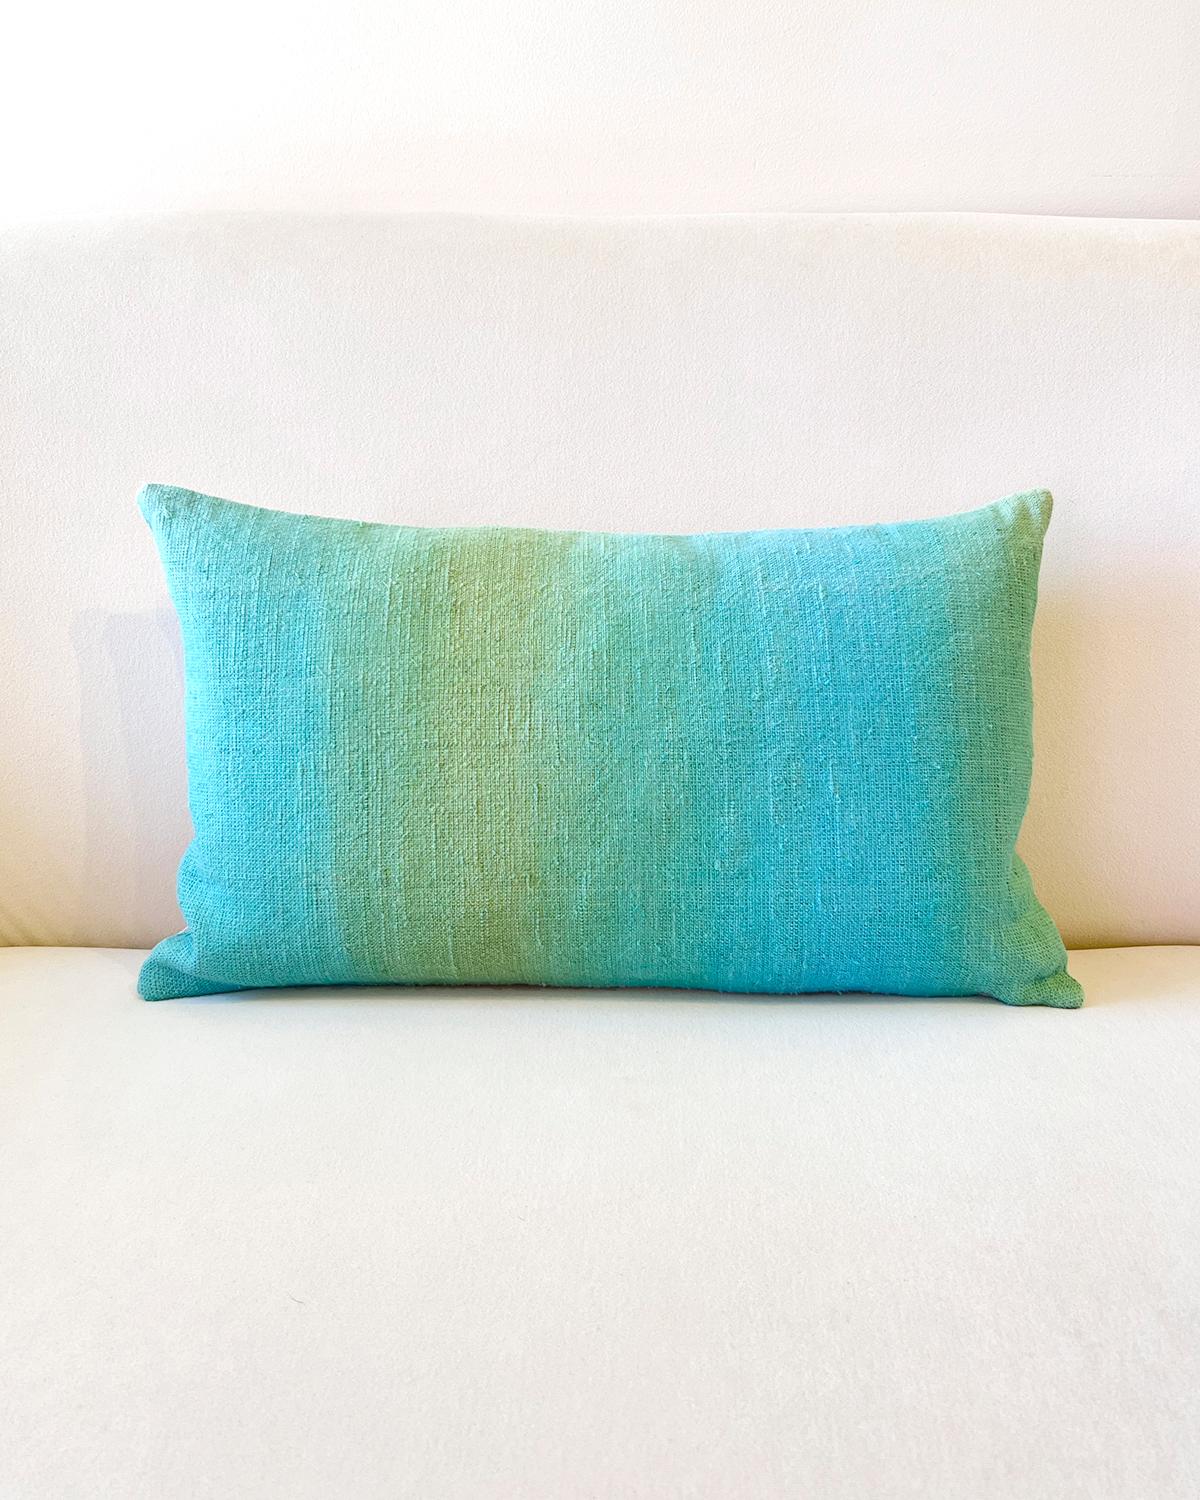 Hand-Crafted Espanyolet Aqua Ombre Hand-Painted Vintage Linen Pillow 20